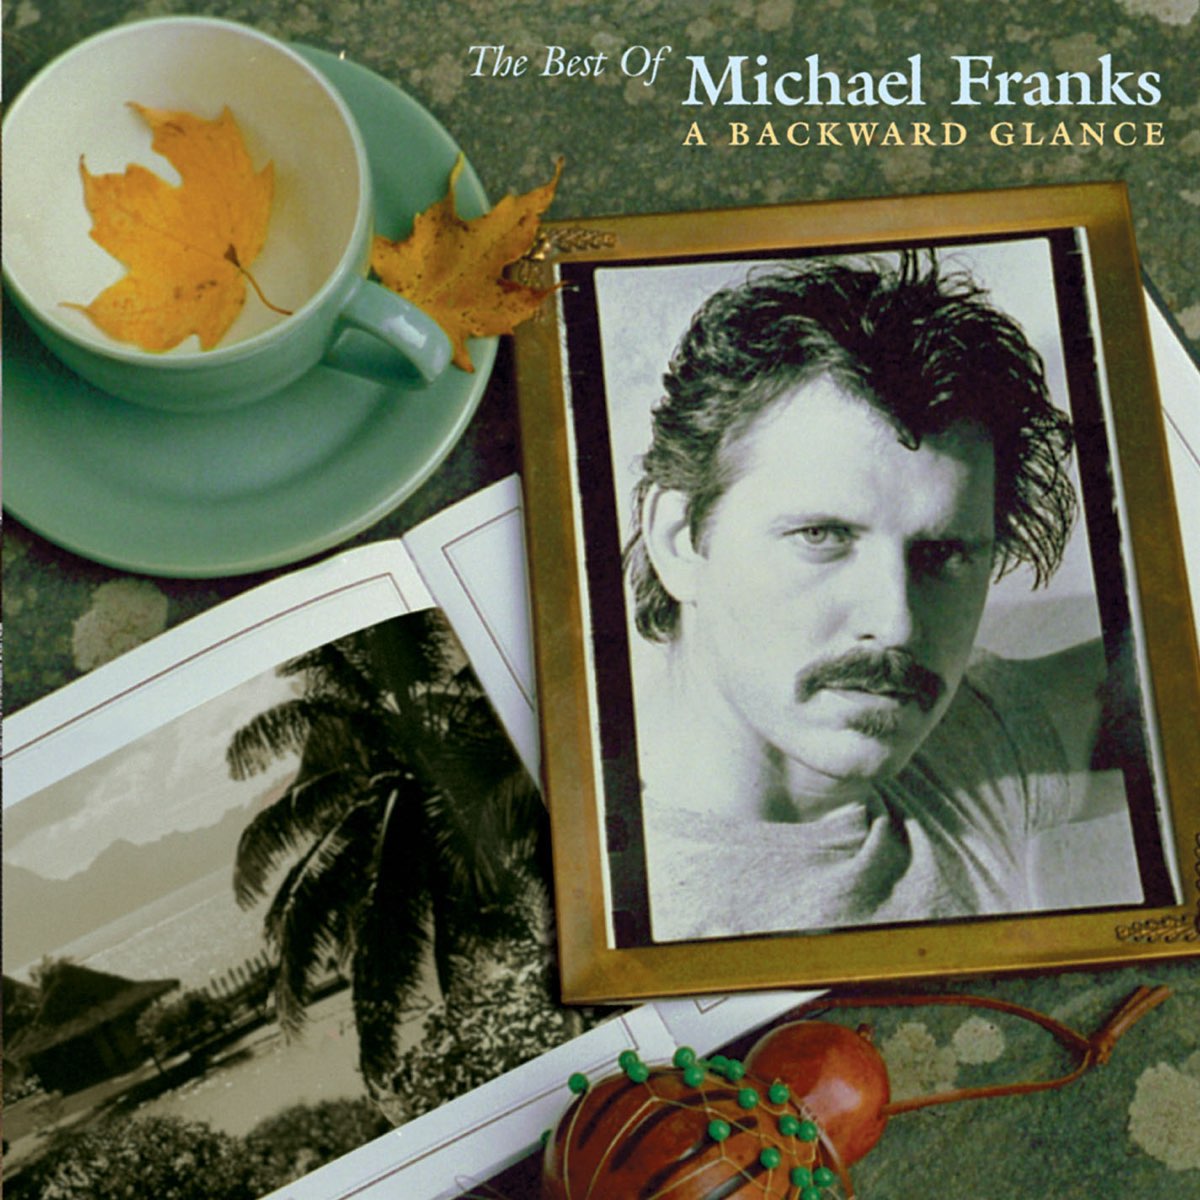 ‎The Best of Michael Franks A Backward Glance by Michael Franks on